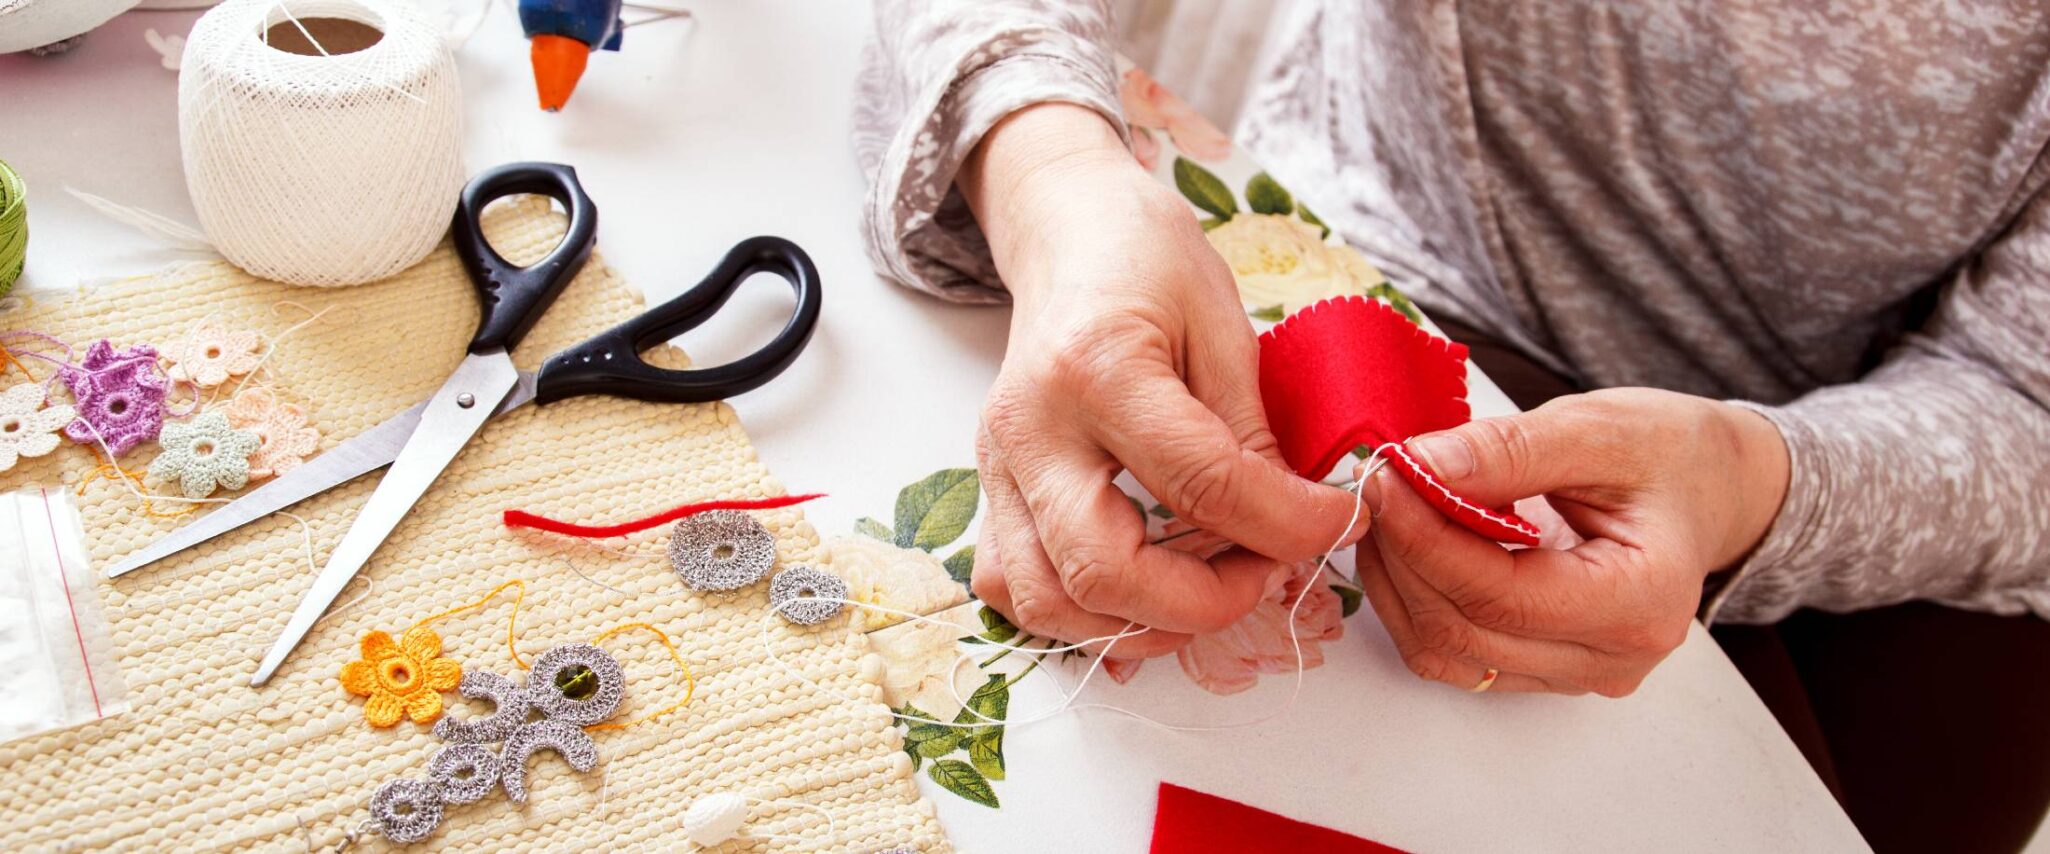 senior doing summer crafts for seniors with dementia